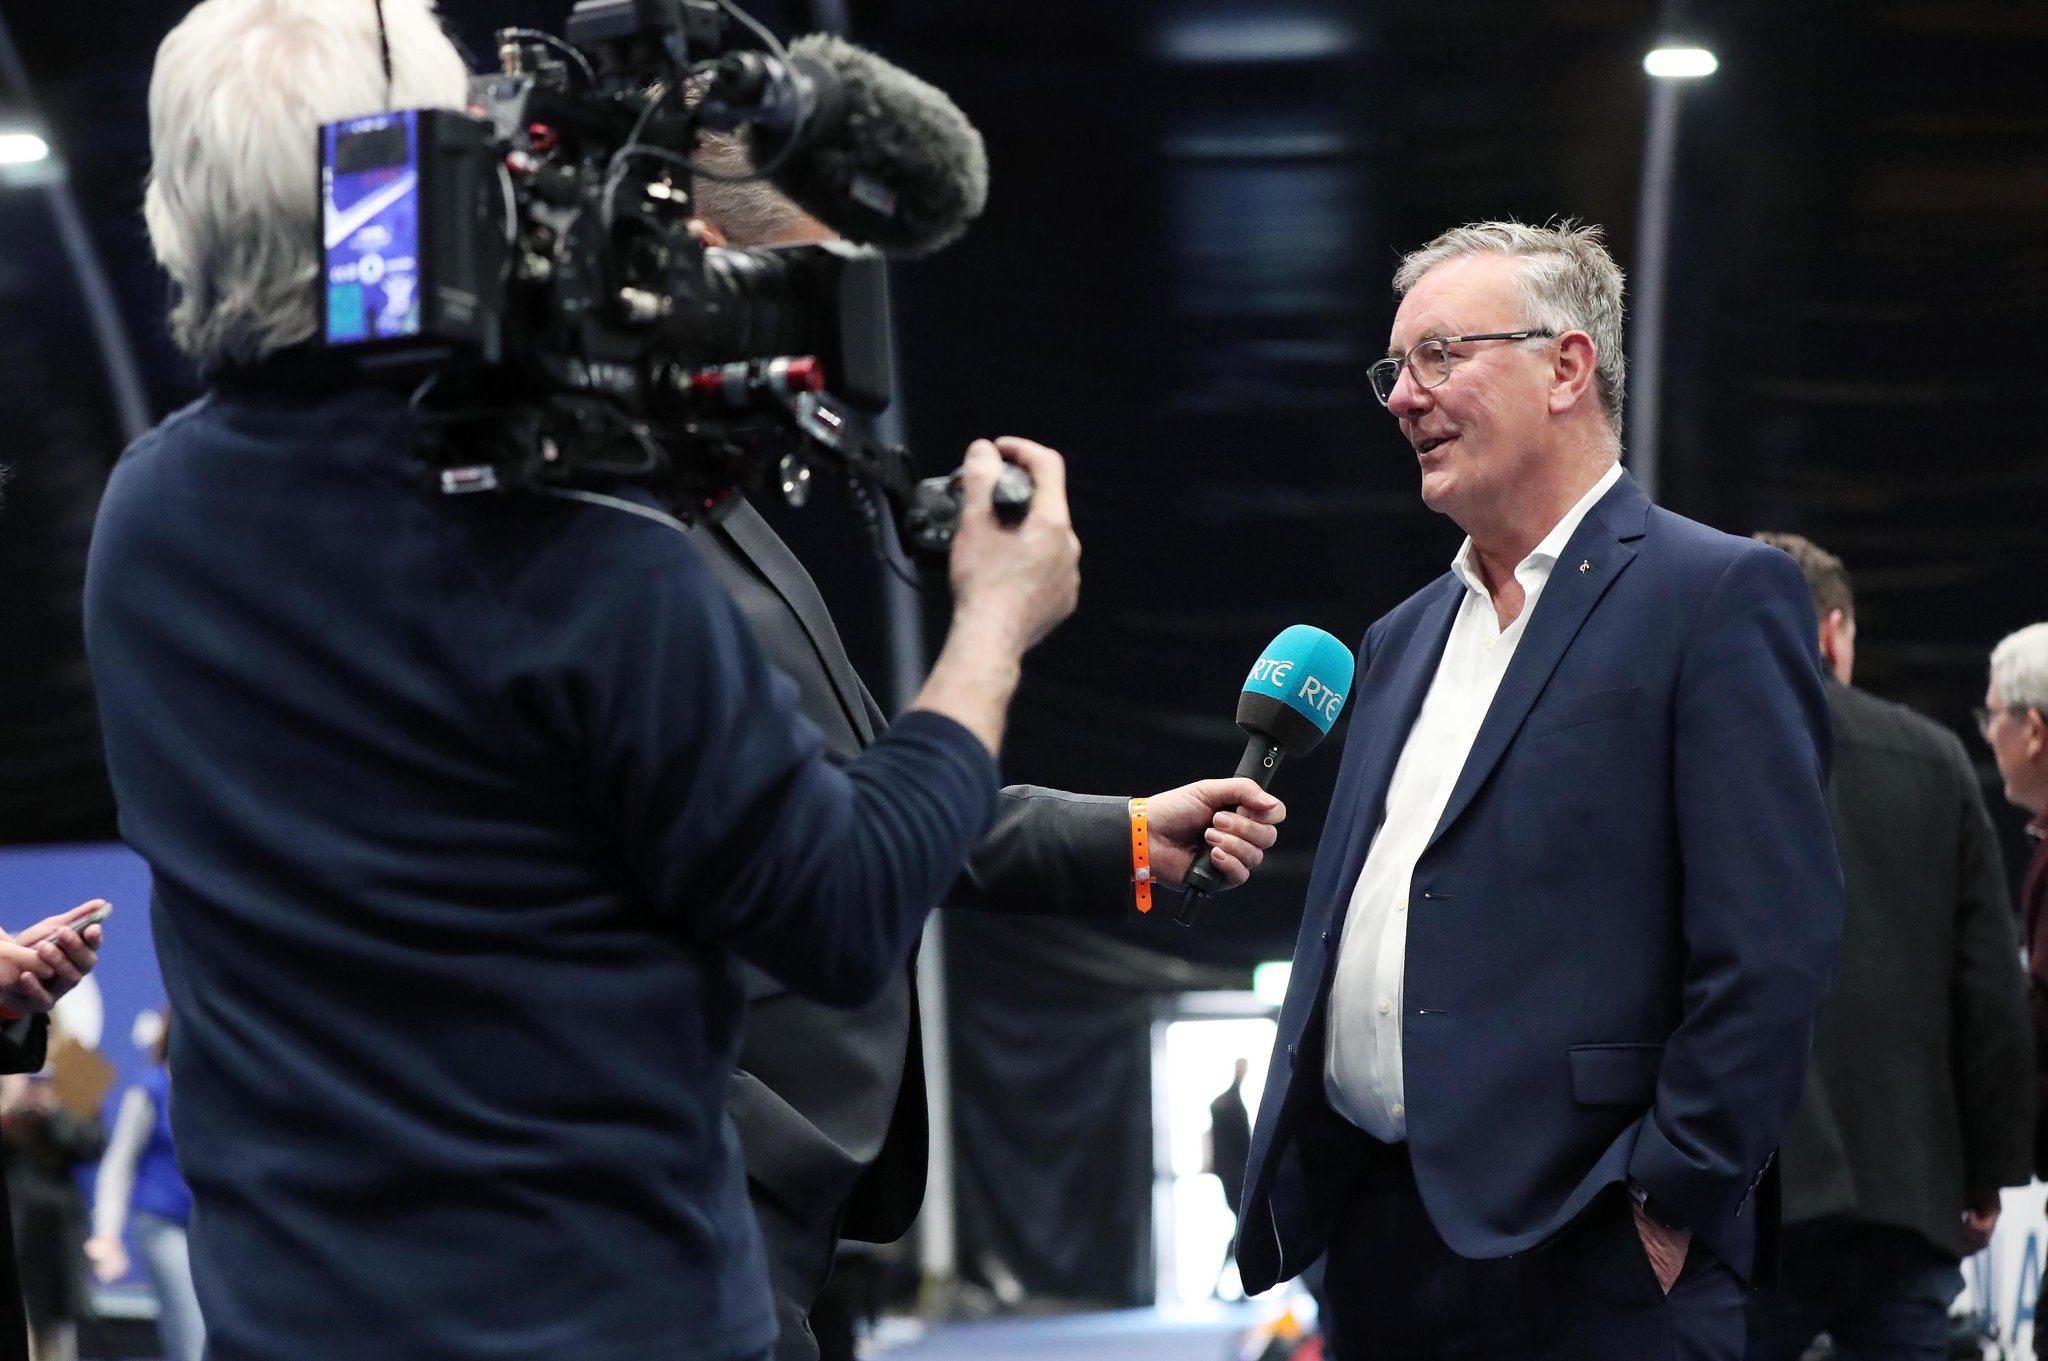 Election 2022: Mike Nesbitt admits he is in battle to stay in Stormont